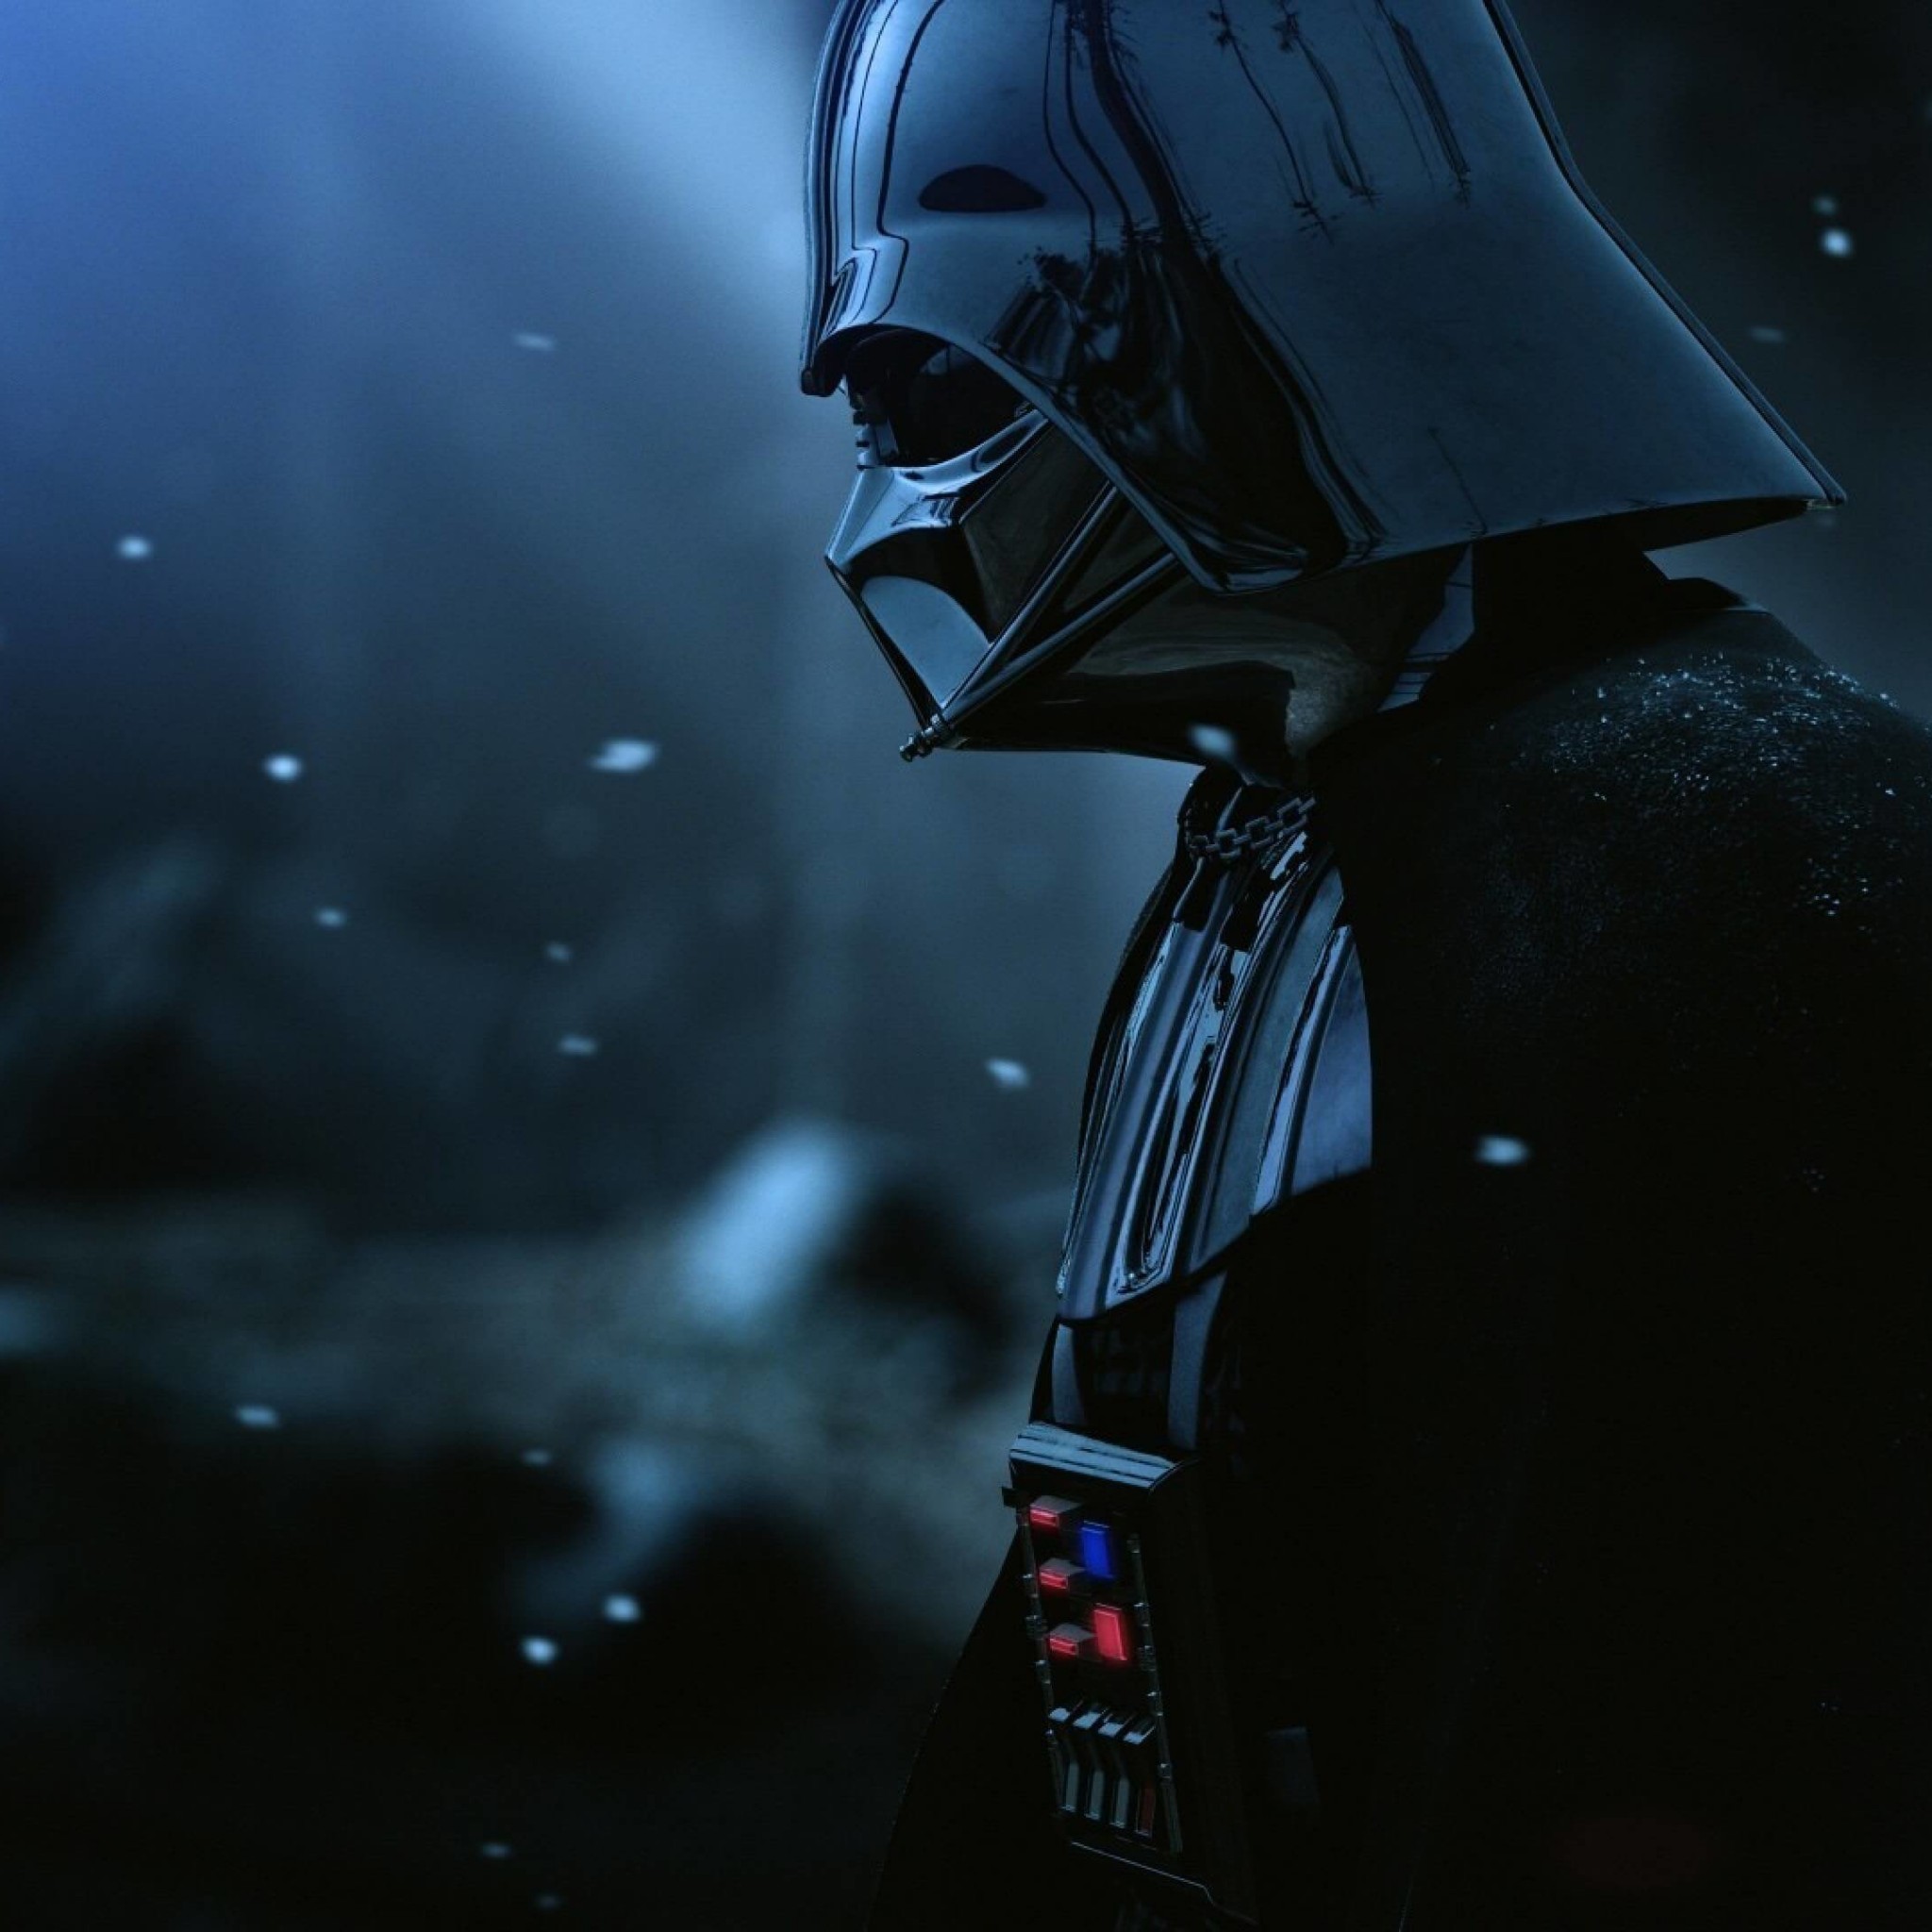 Darth Vader - The Force Unleashed 2 Wallpaper for Google Nexus 9